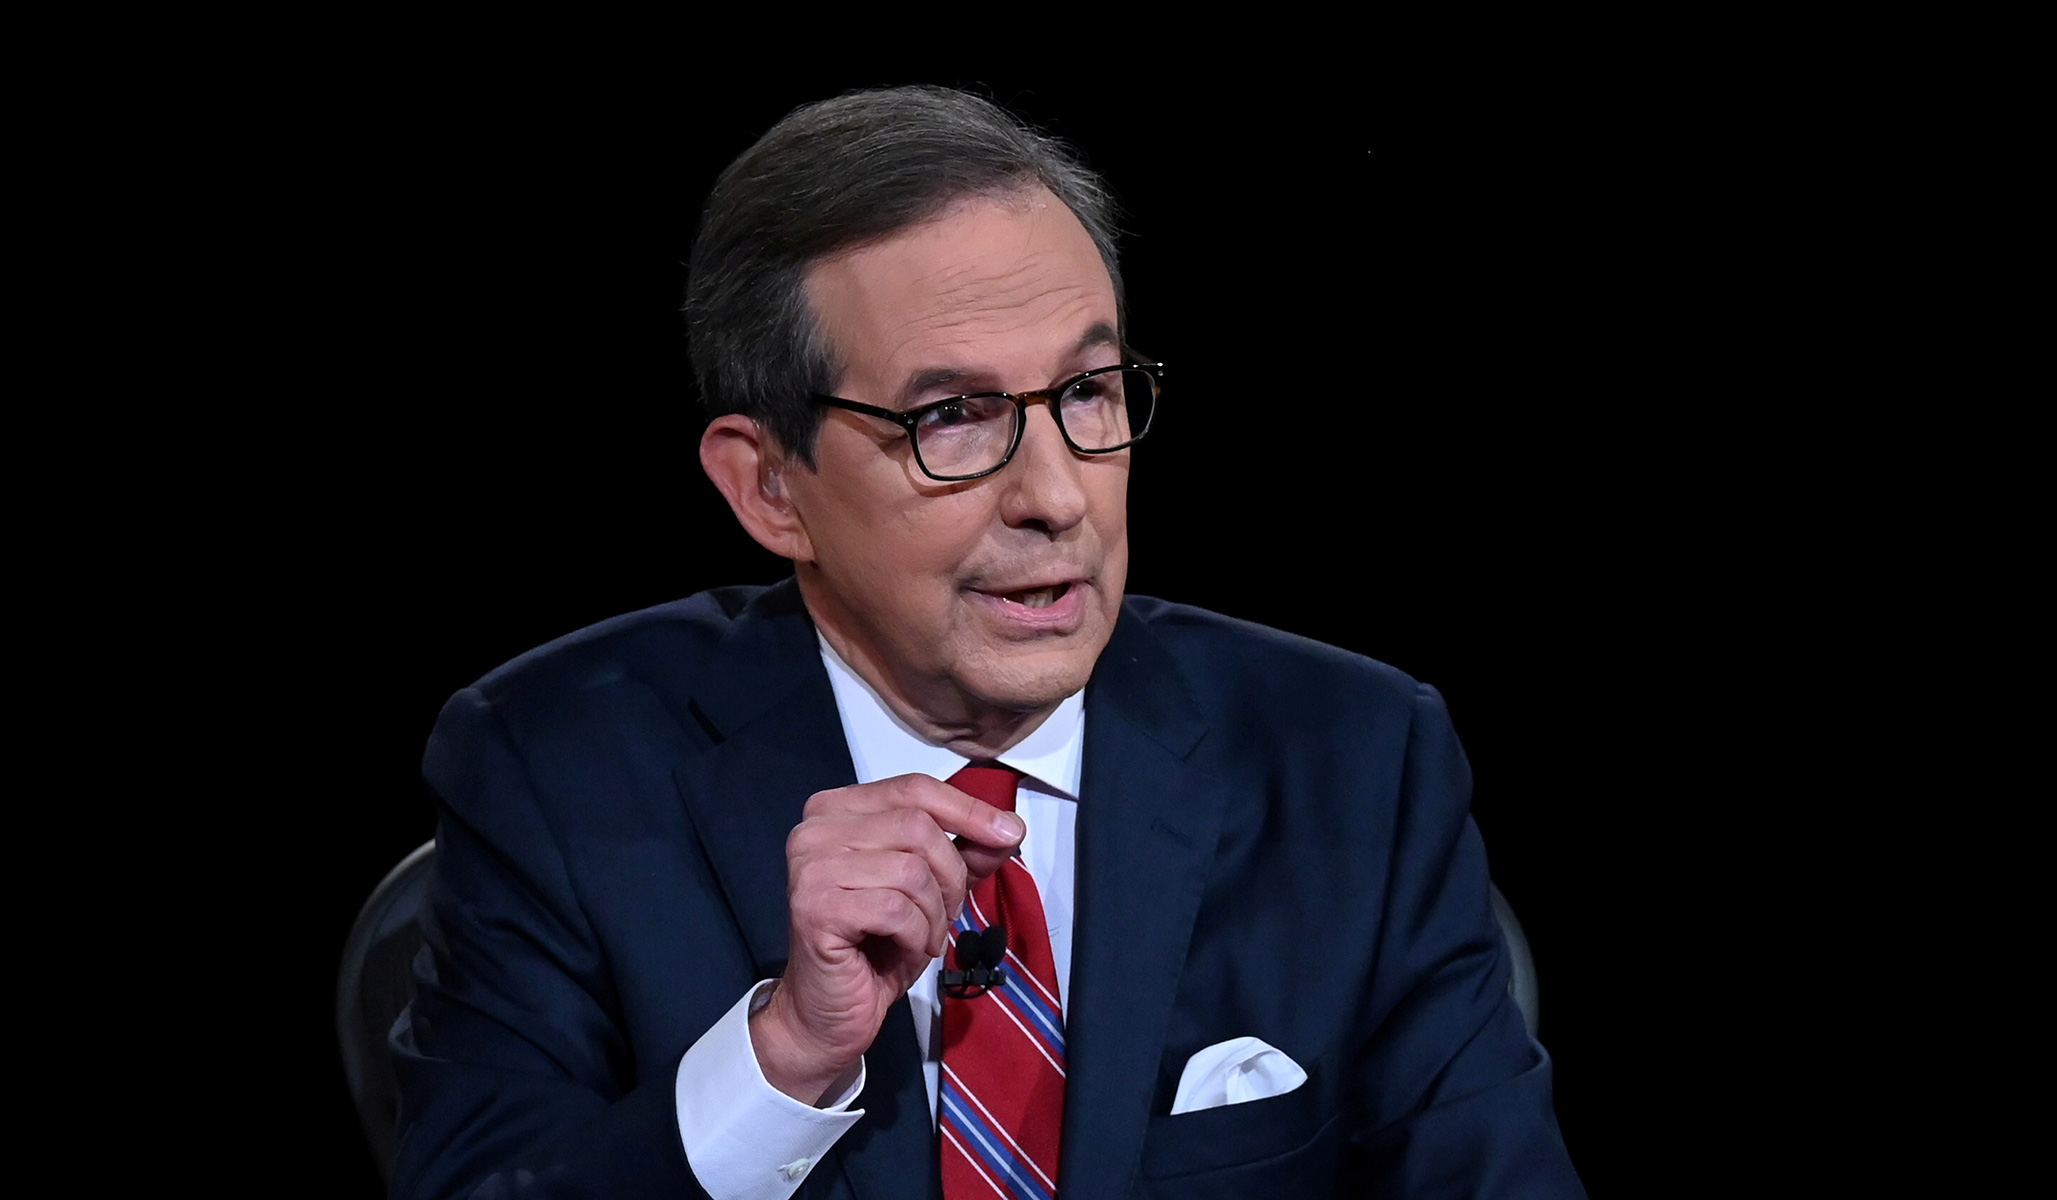 Chris Wallace Leaving Fox News after 18 Years